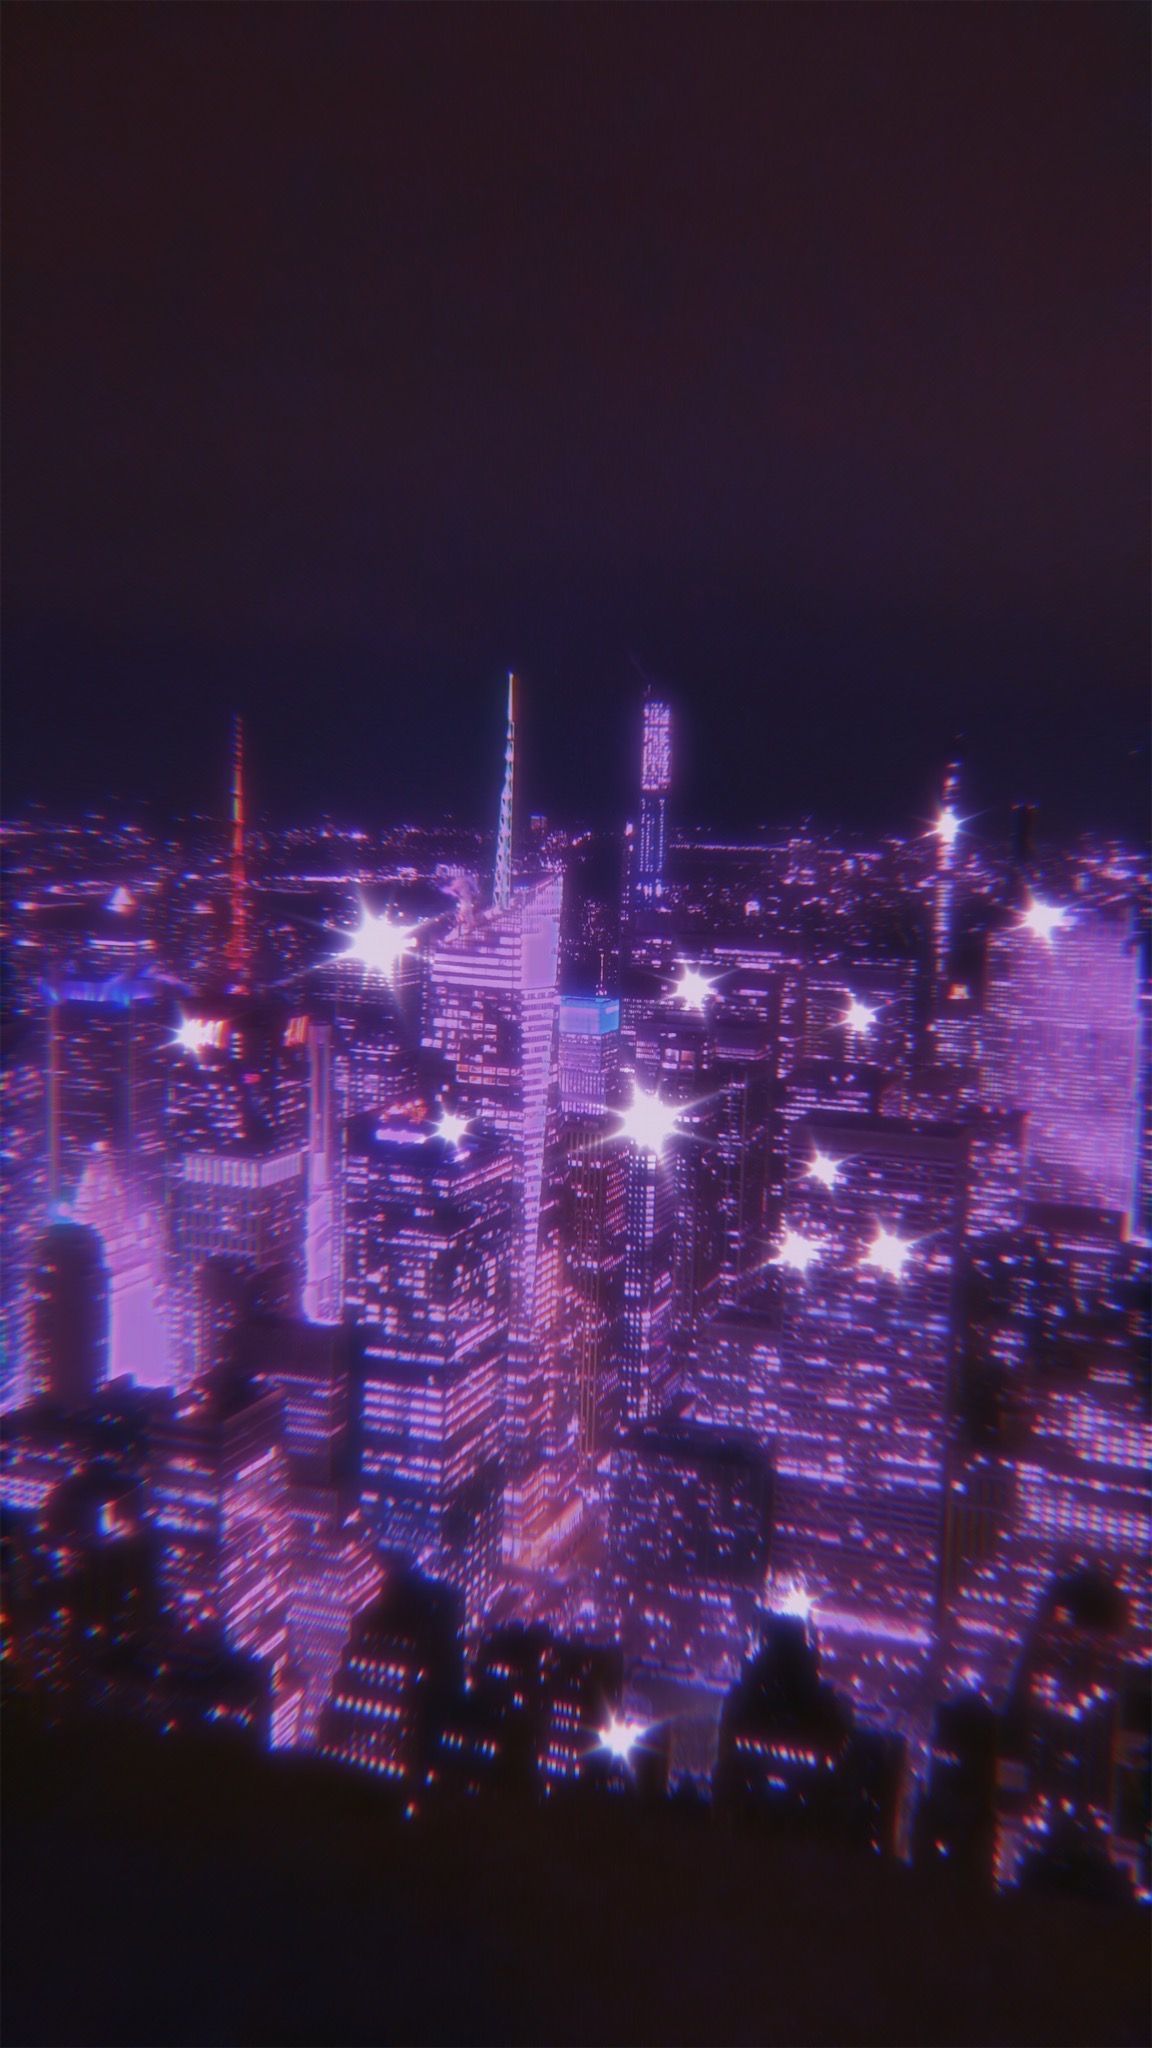 Aesthetic wallpaper of a city at night with stars - New York